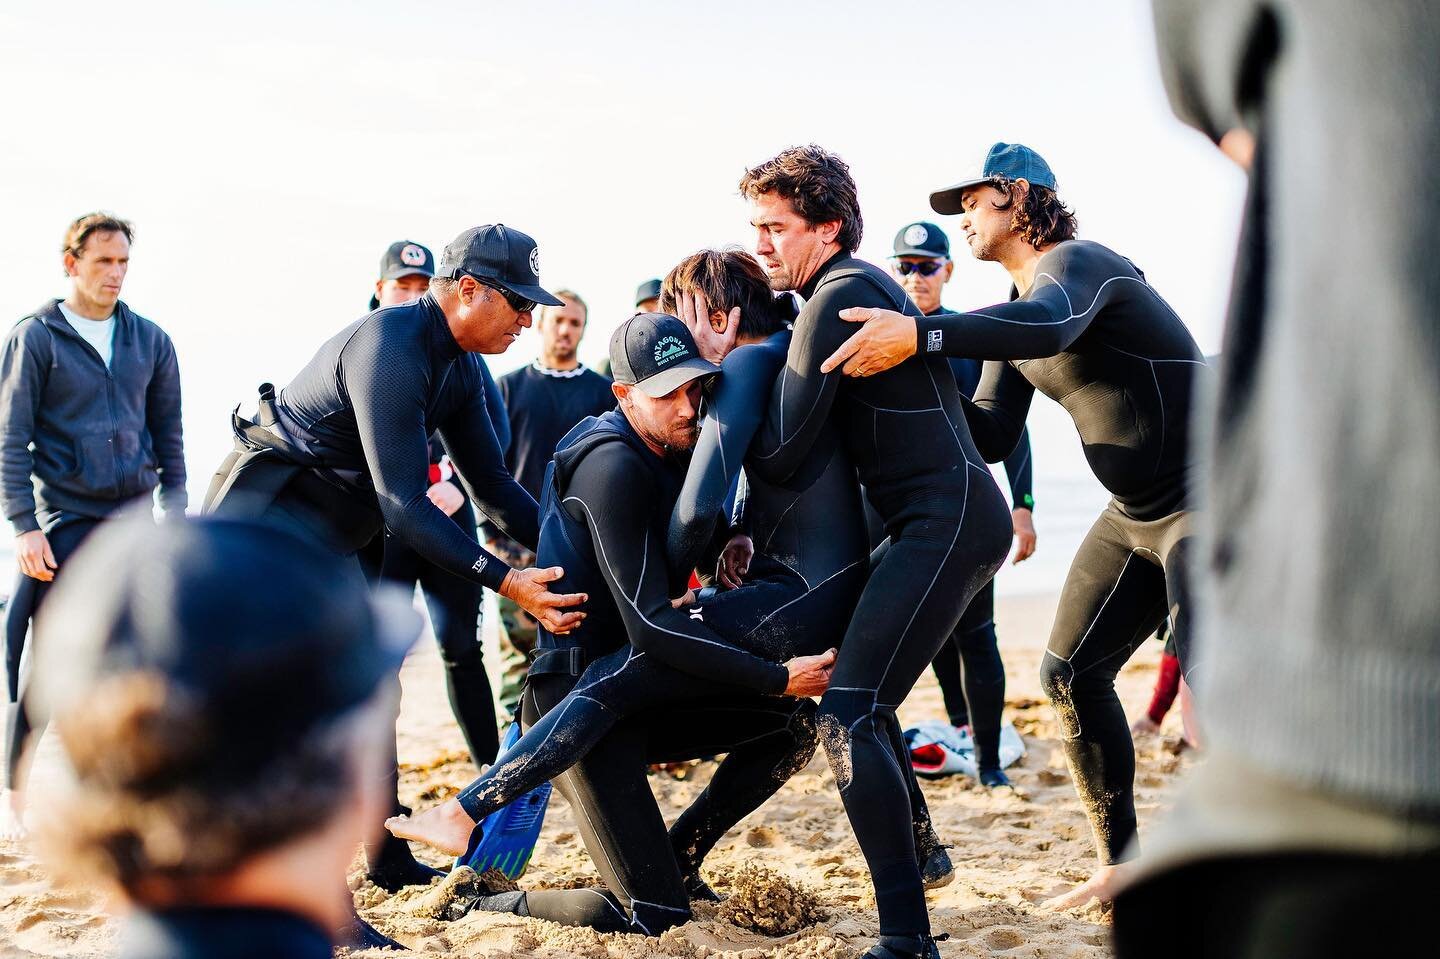 If you spend enough time in the surf line-up, it&rsquo;s not a matter of &ldquo;if,&rdquo; but rather &ldquo;when&rdquo; you&rsquo;ll be called on to rescue another&rsquo;s life.
⠀
Every. Second. Counts. In those moments of chaos, you&rsquo;ll need t